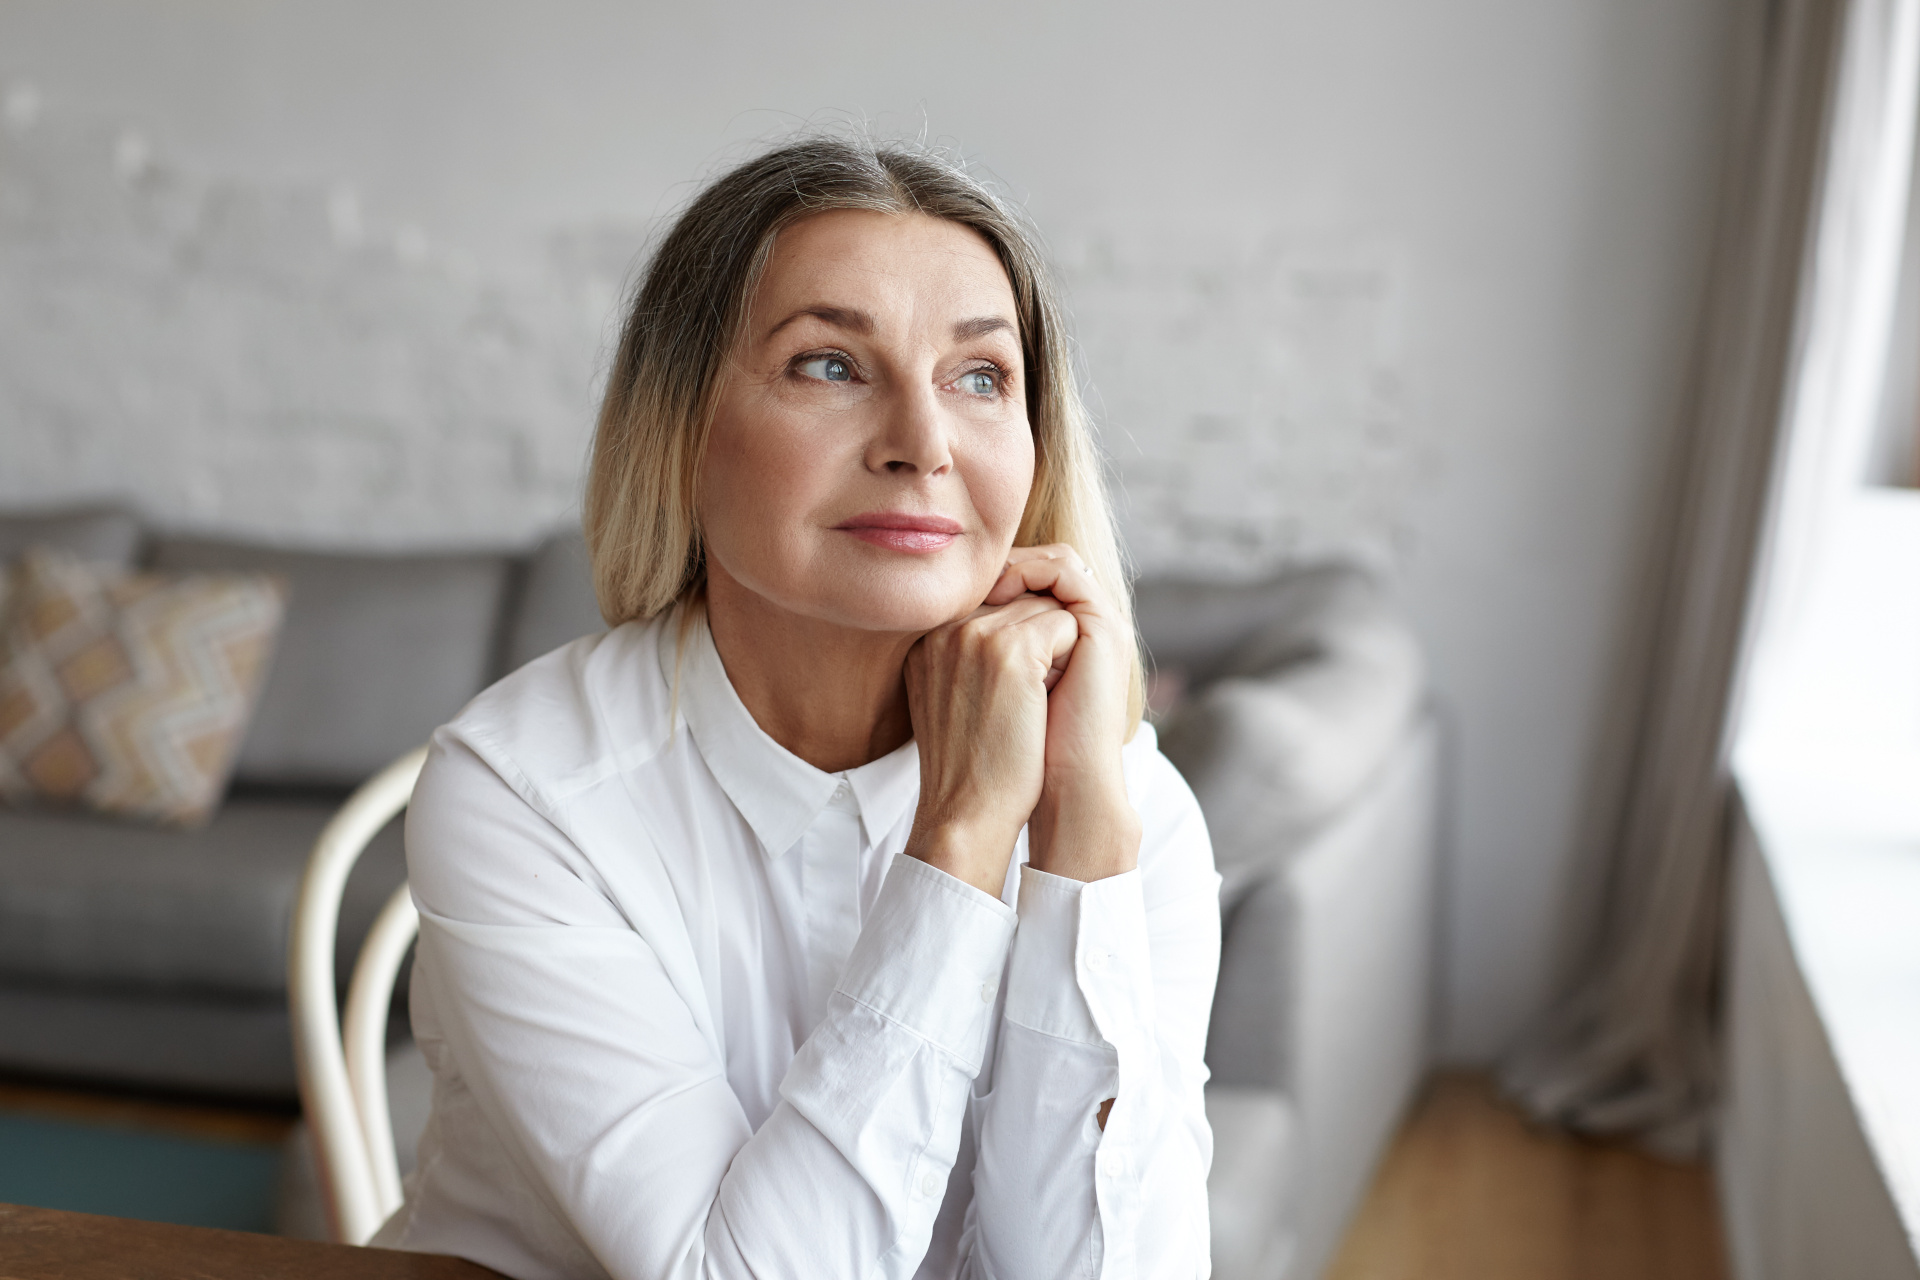 Indoor portrait of beautiful 50 year old Caucasian woman with thick loose hair sitting by the window in living room having dreamy pensive look, daydreaming or thinking about something pleasant